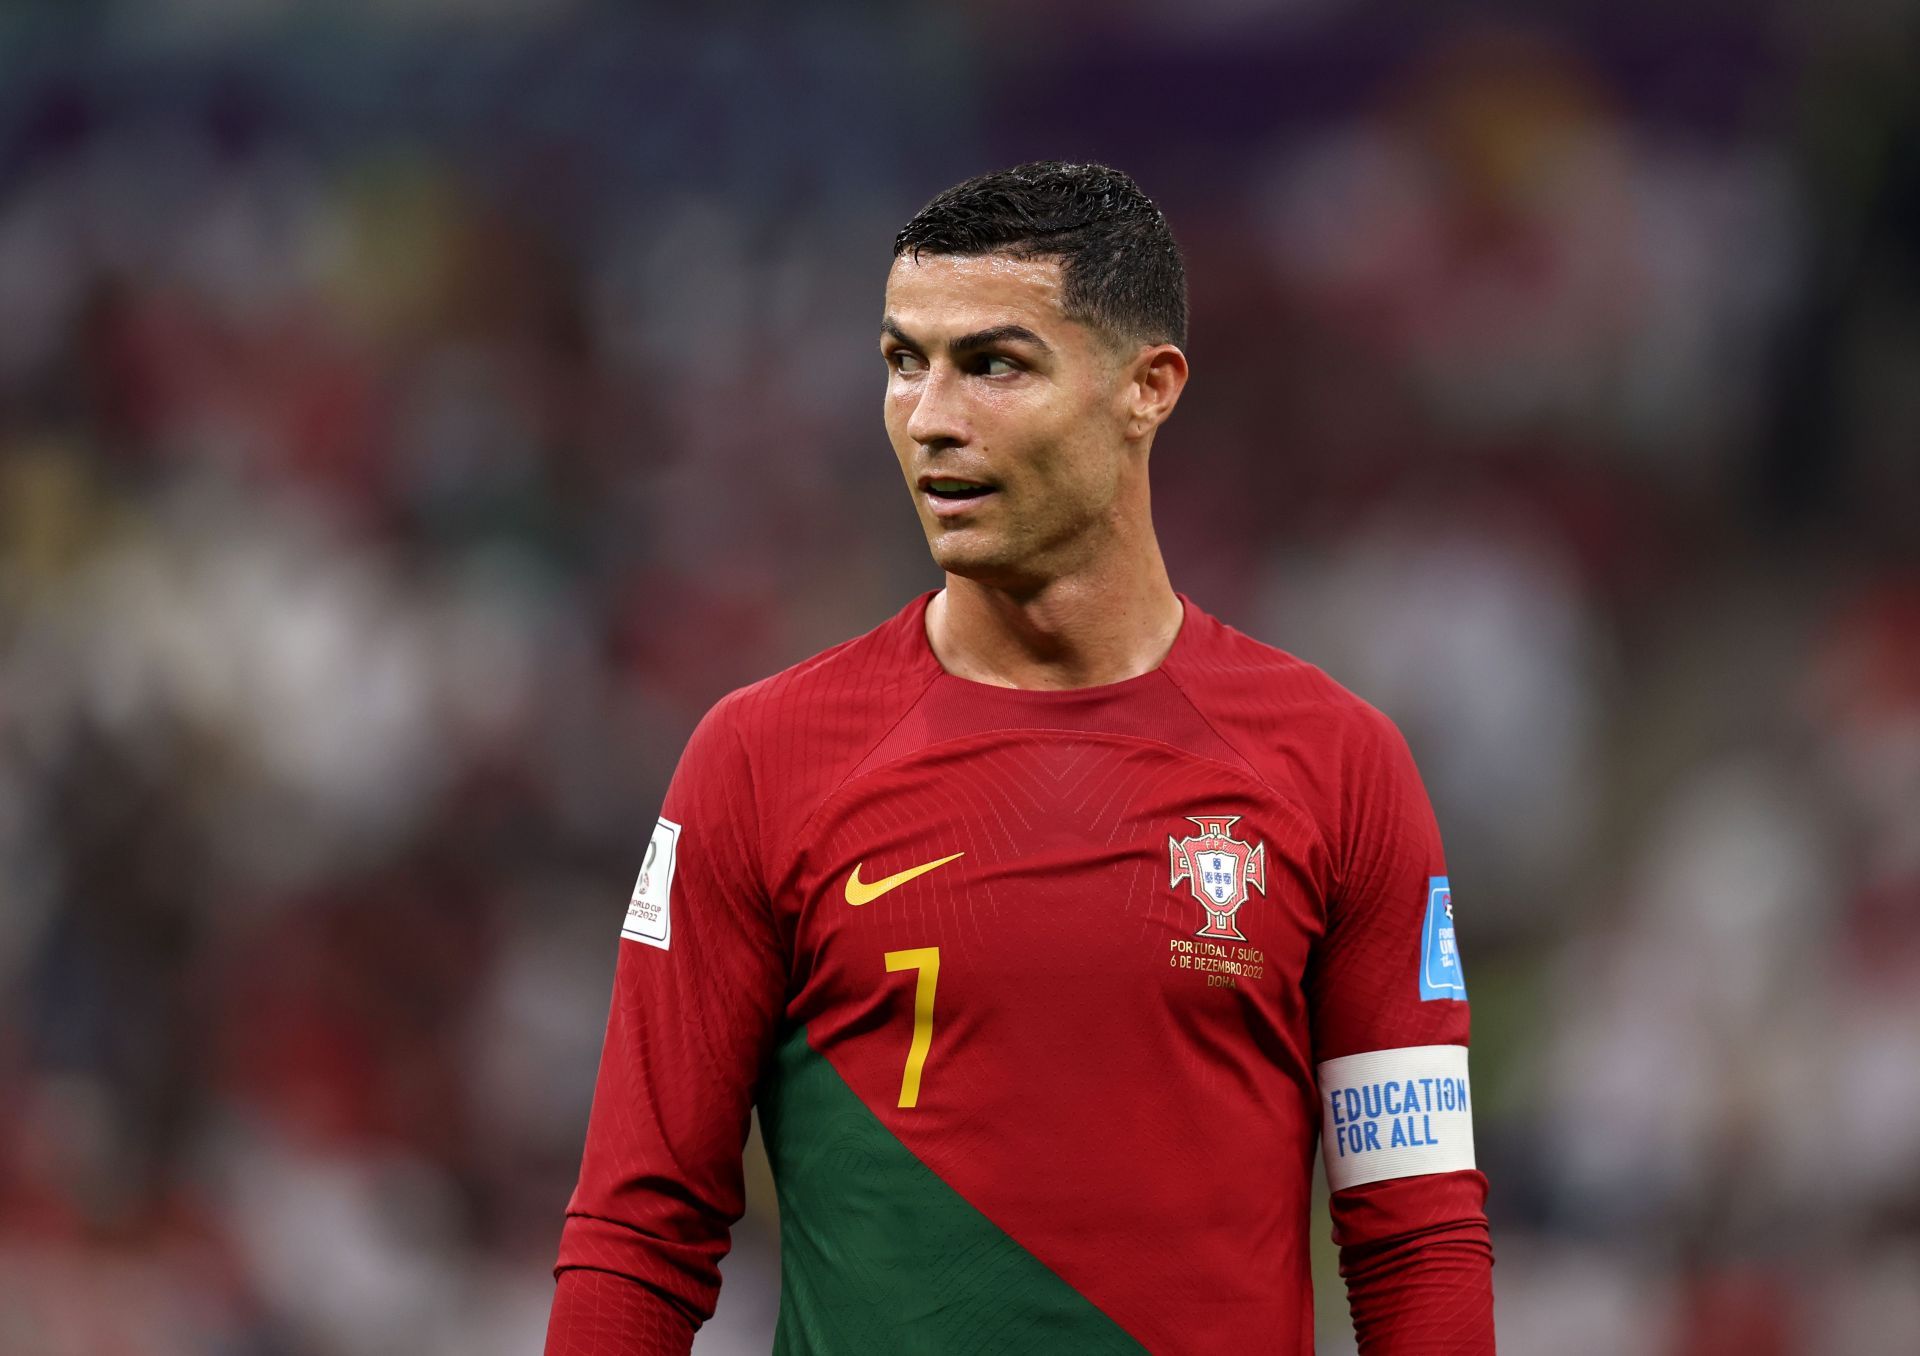 The 37-year-old is currently representing Portugal at the 2022 FIFA World Cup